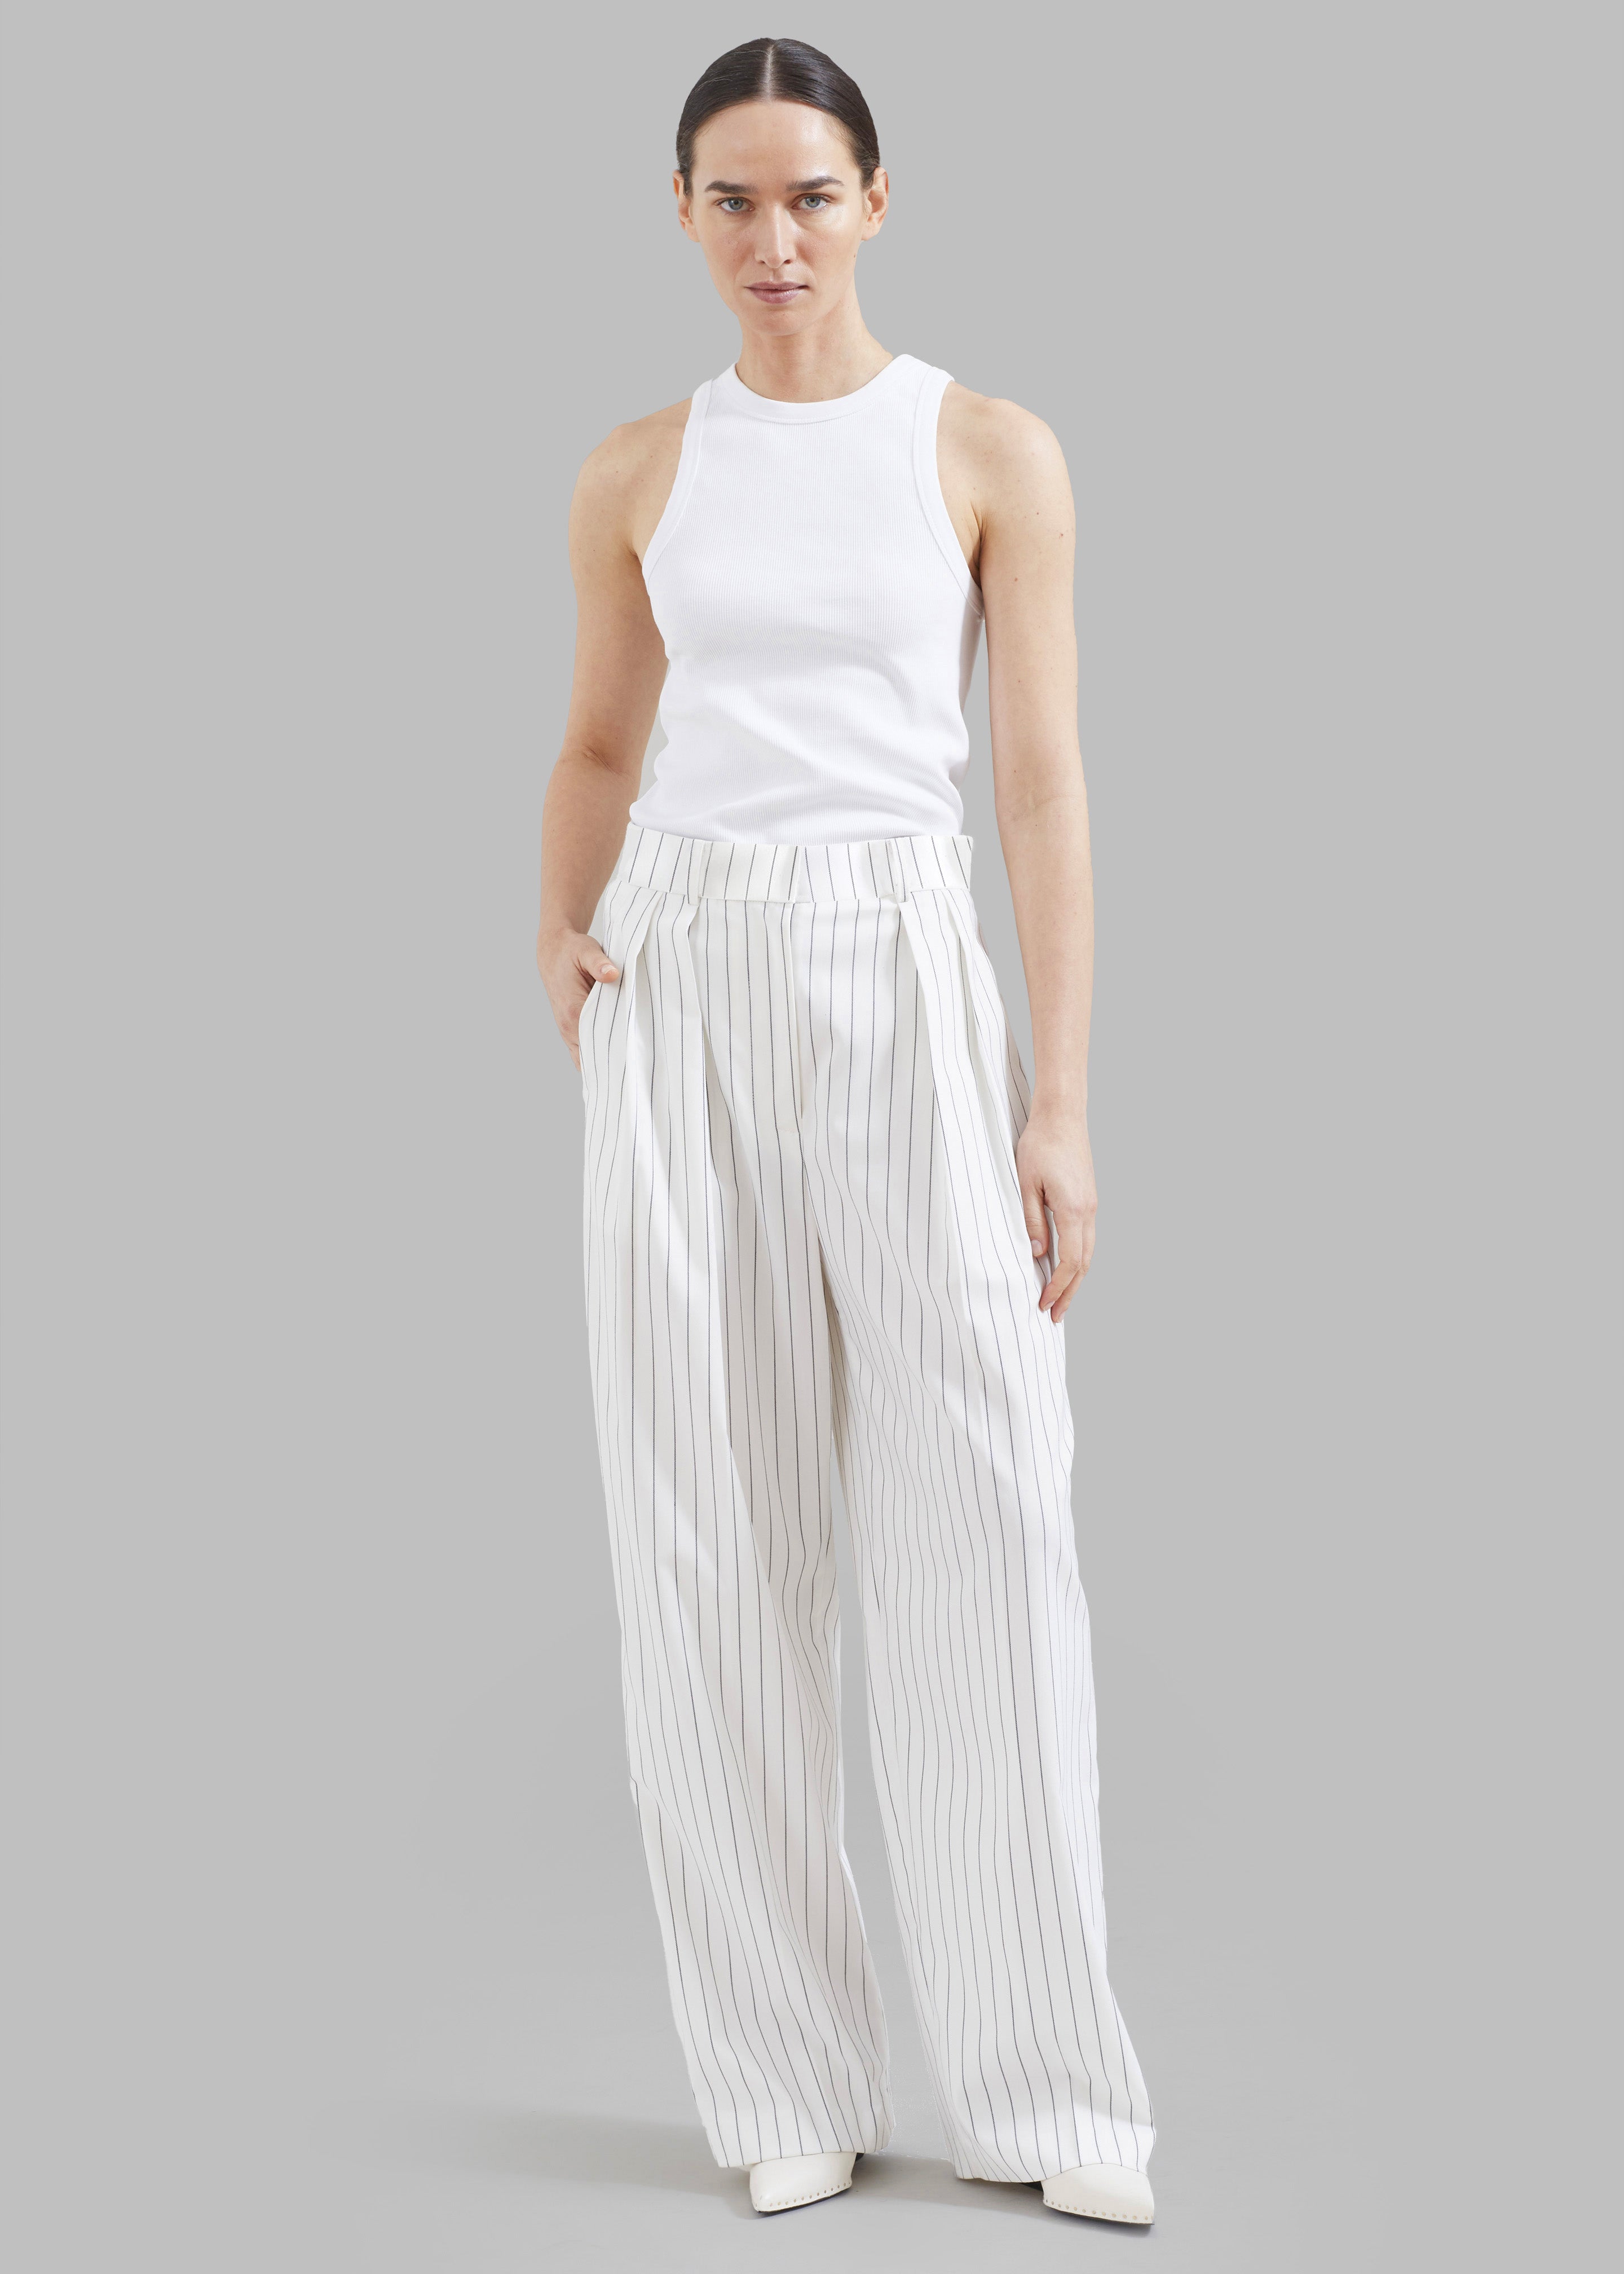 Tansy Fluid Pleated Trousers - White - 7